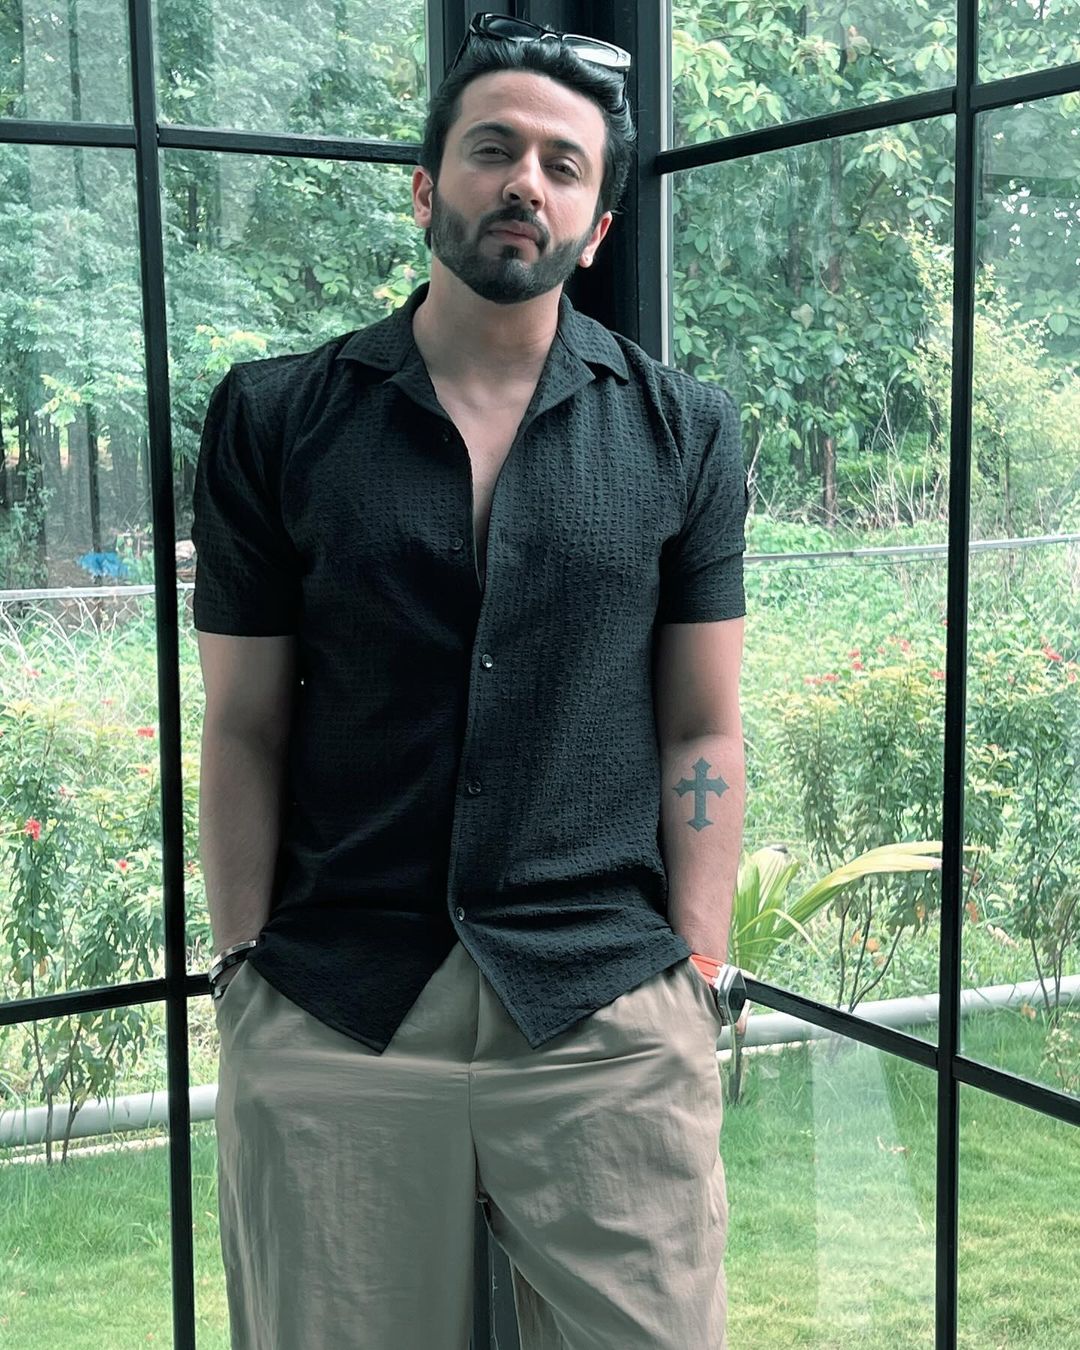 Sasural Simar Ka Fame Actor Dheeraj Dhoopar Proves That Pink Is Not Only A Women’s Color. See This Handsome’s Sparking Conversations About Gender-Neutral Fashion. 